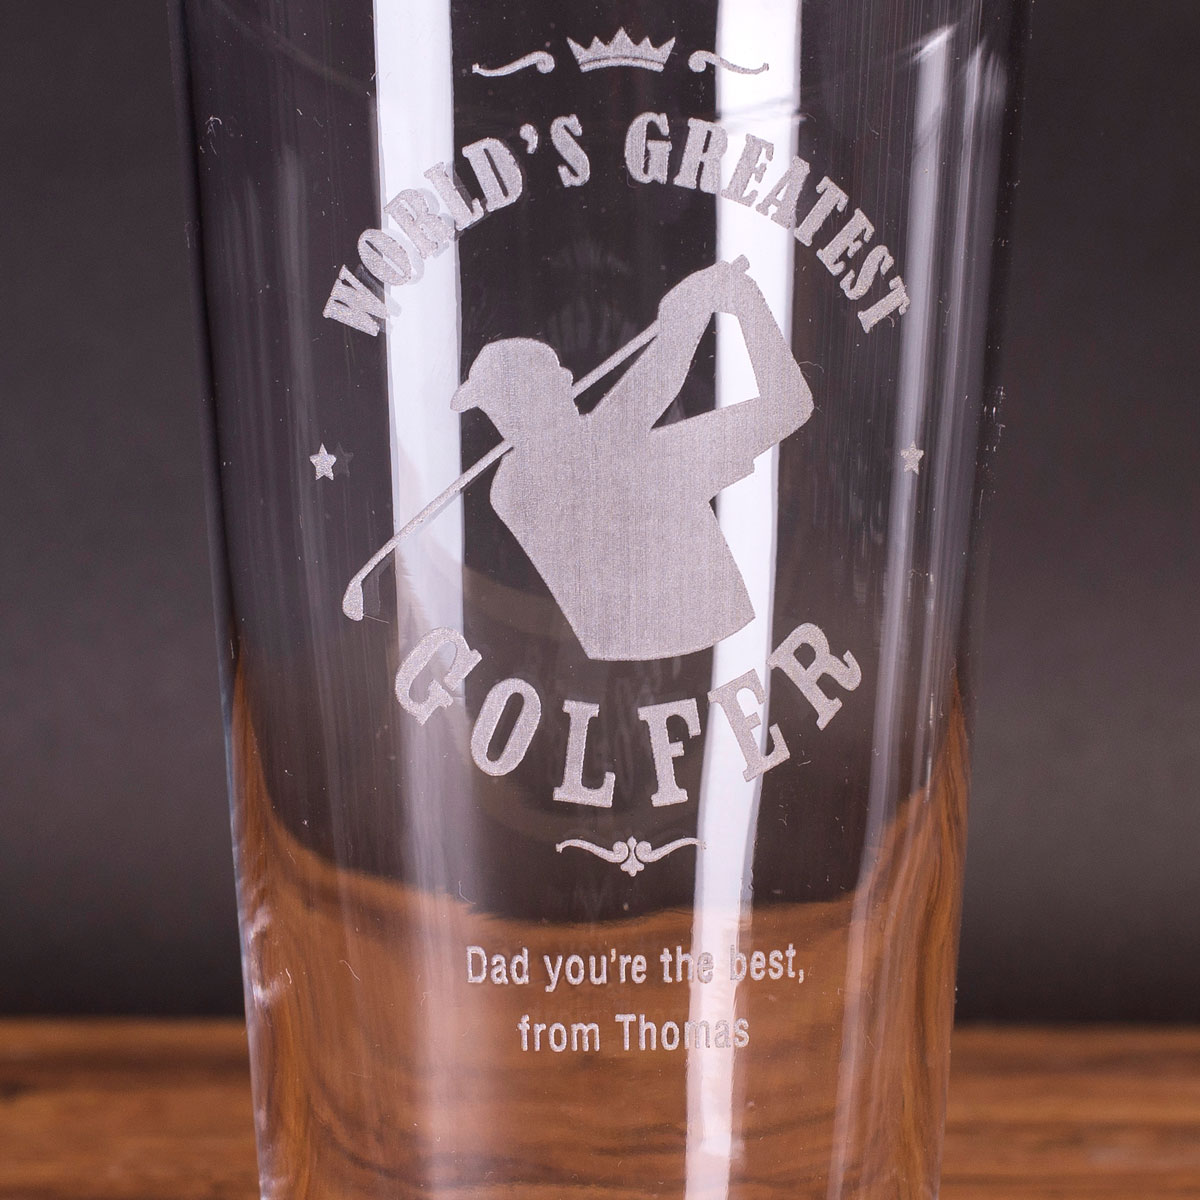 Personalised Pint Glass - World's Greatest Golfer